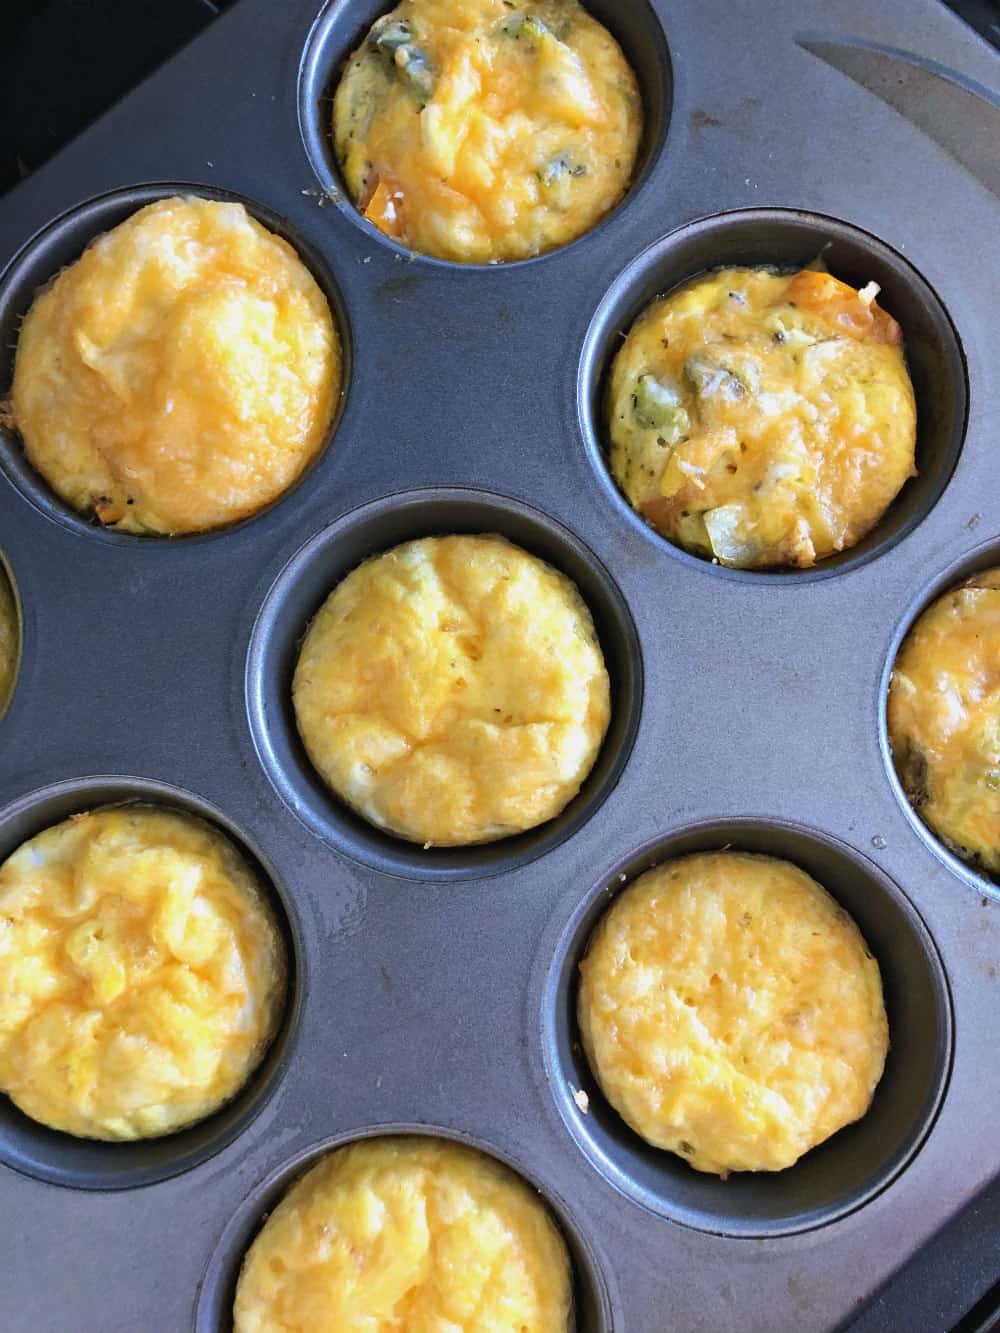 https://www.chocolateslopes.com/wp-content/uploads/2222/02/egg-cheese-muffins2.jpg